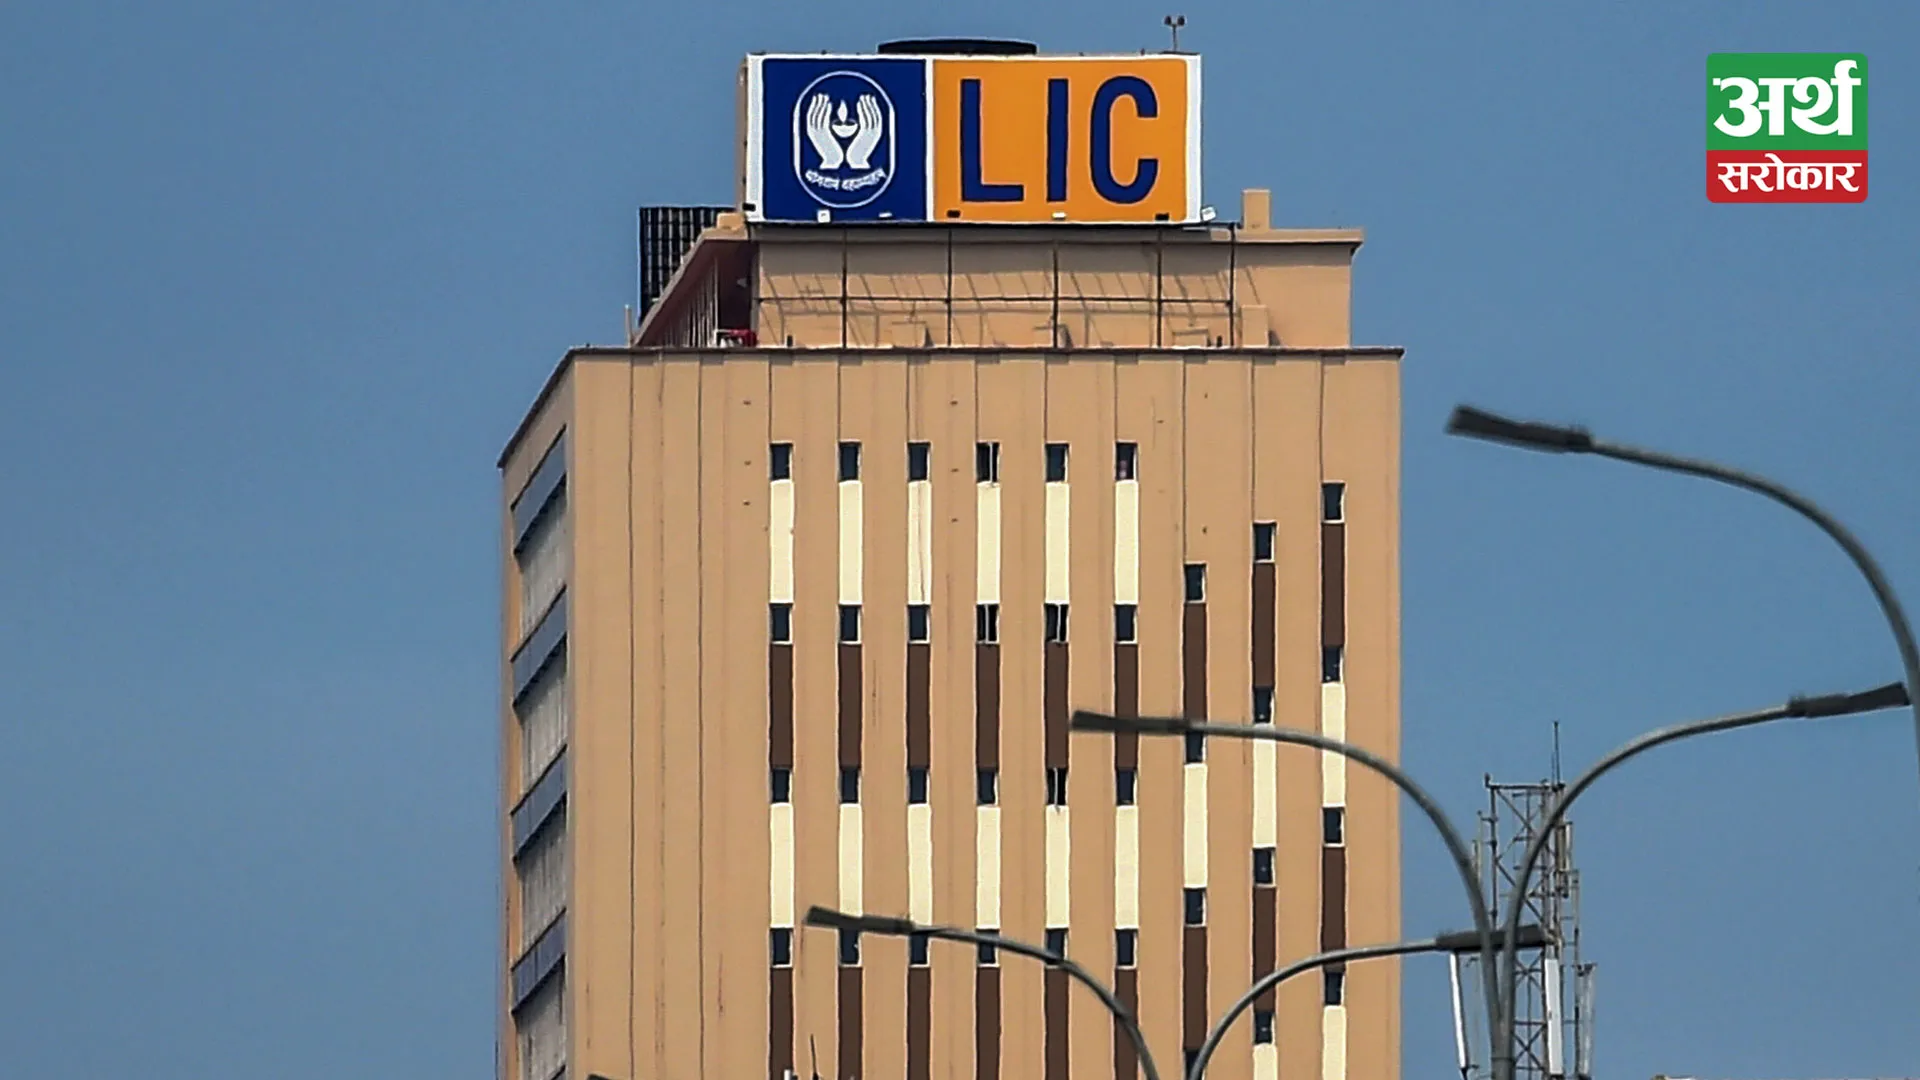 LIC announces 17% salary hike for employees, Plans for future growth, and benefits expansion